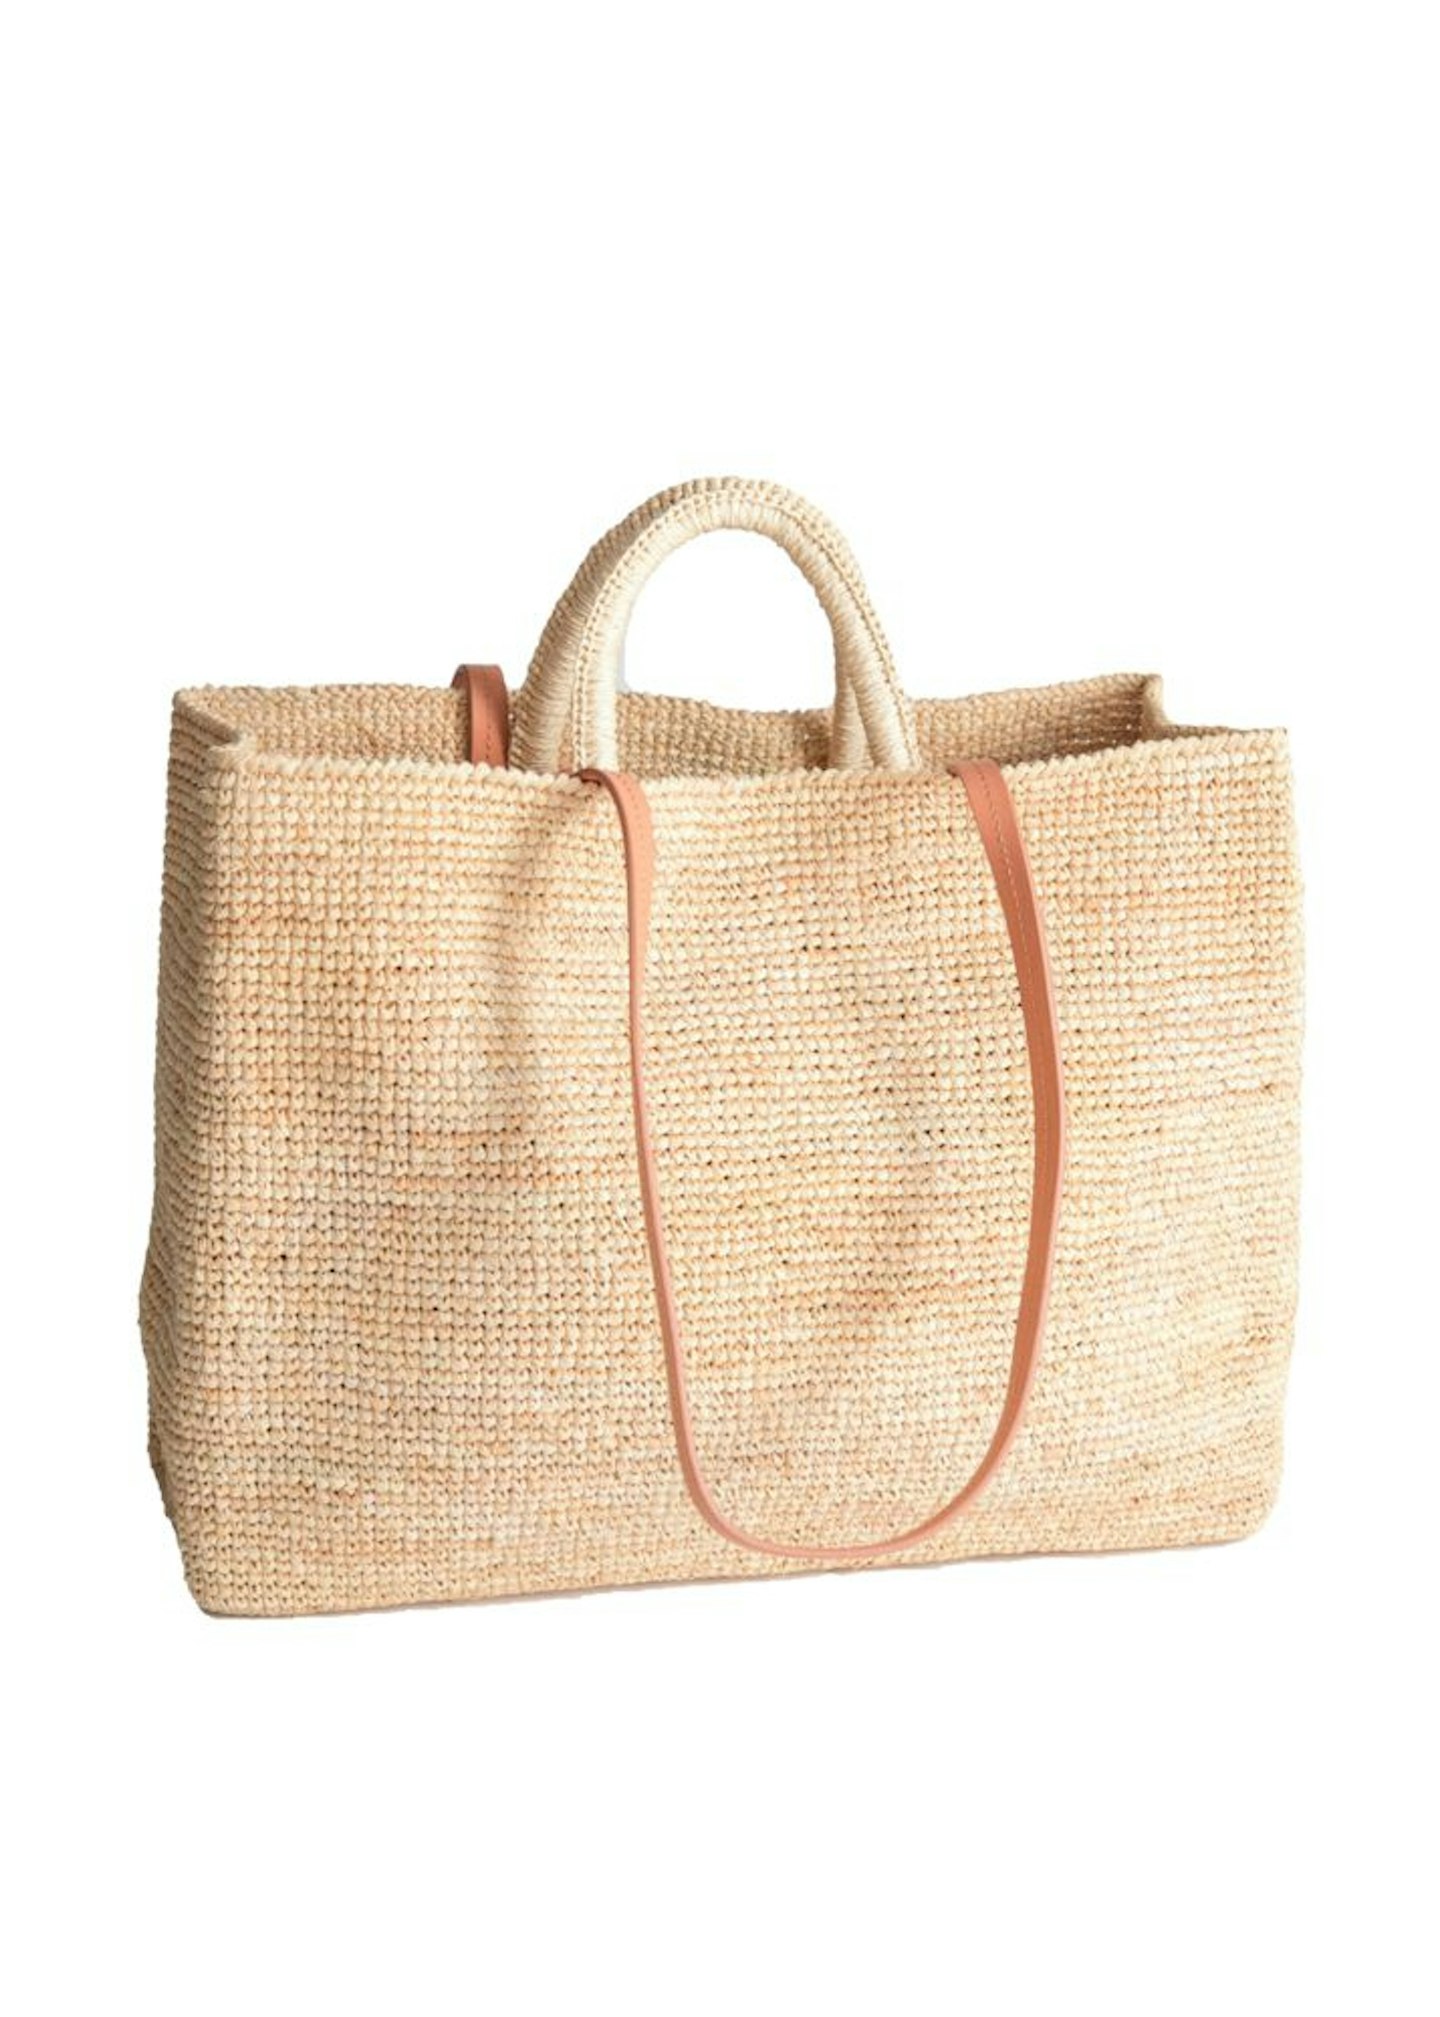 & Other Stories, Large Woven Straw Tote, £55